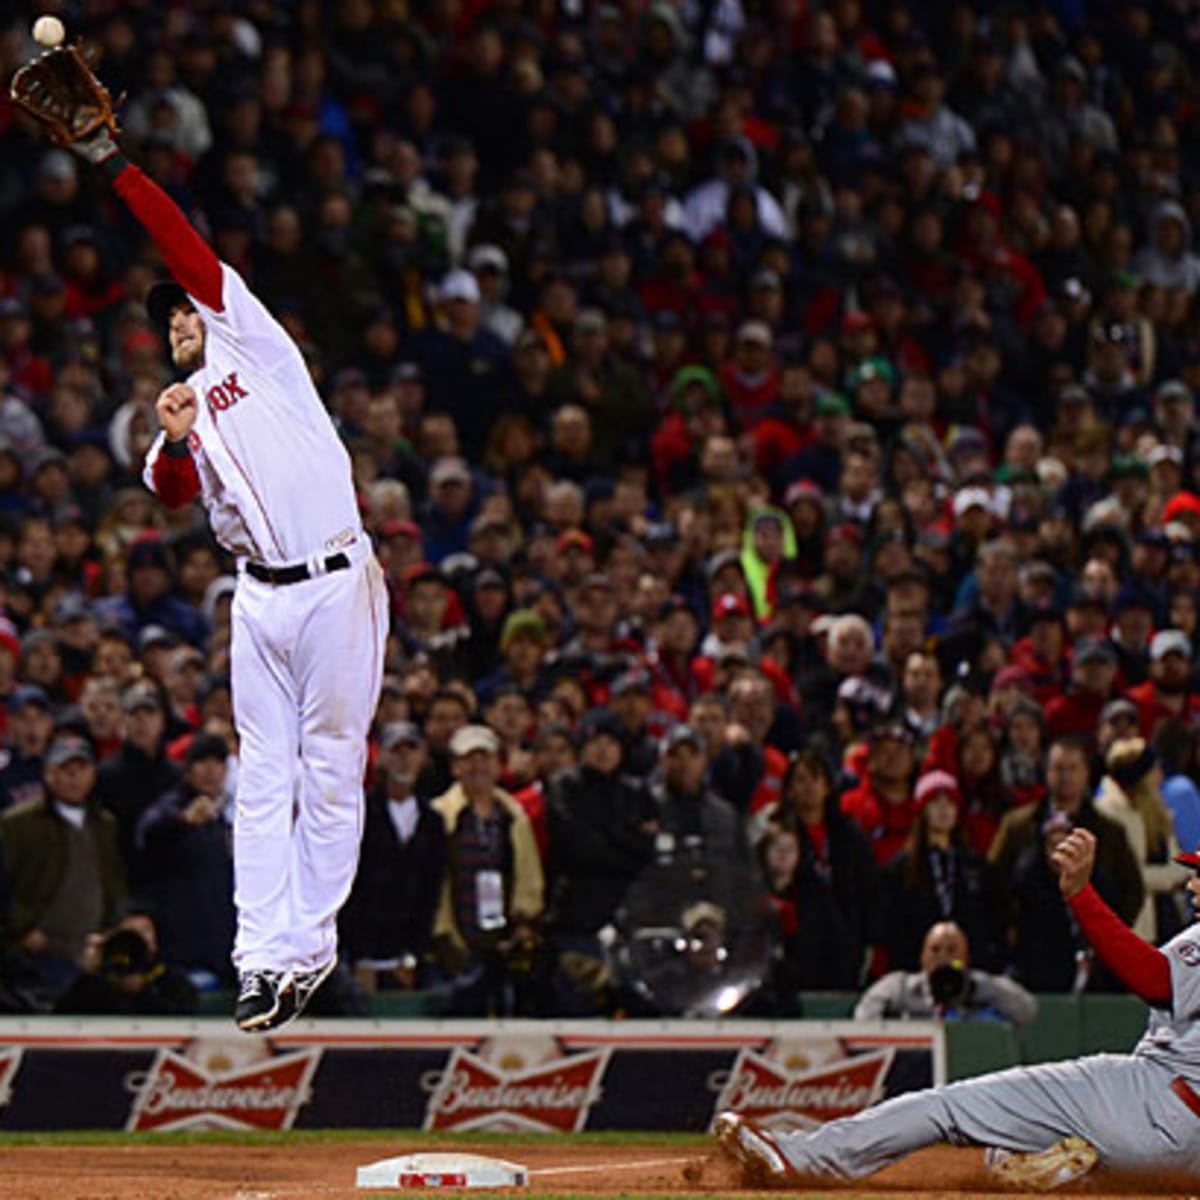 Red Sox outlast Cardinals in error-filled Series opener - The Boston